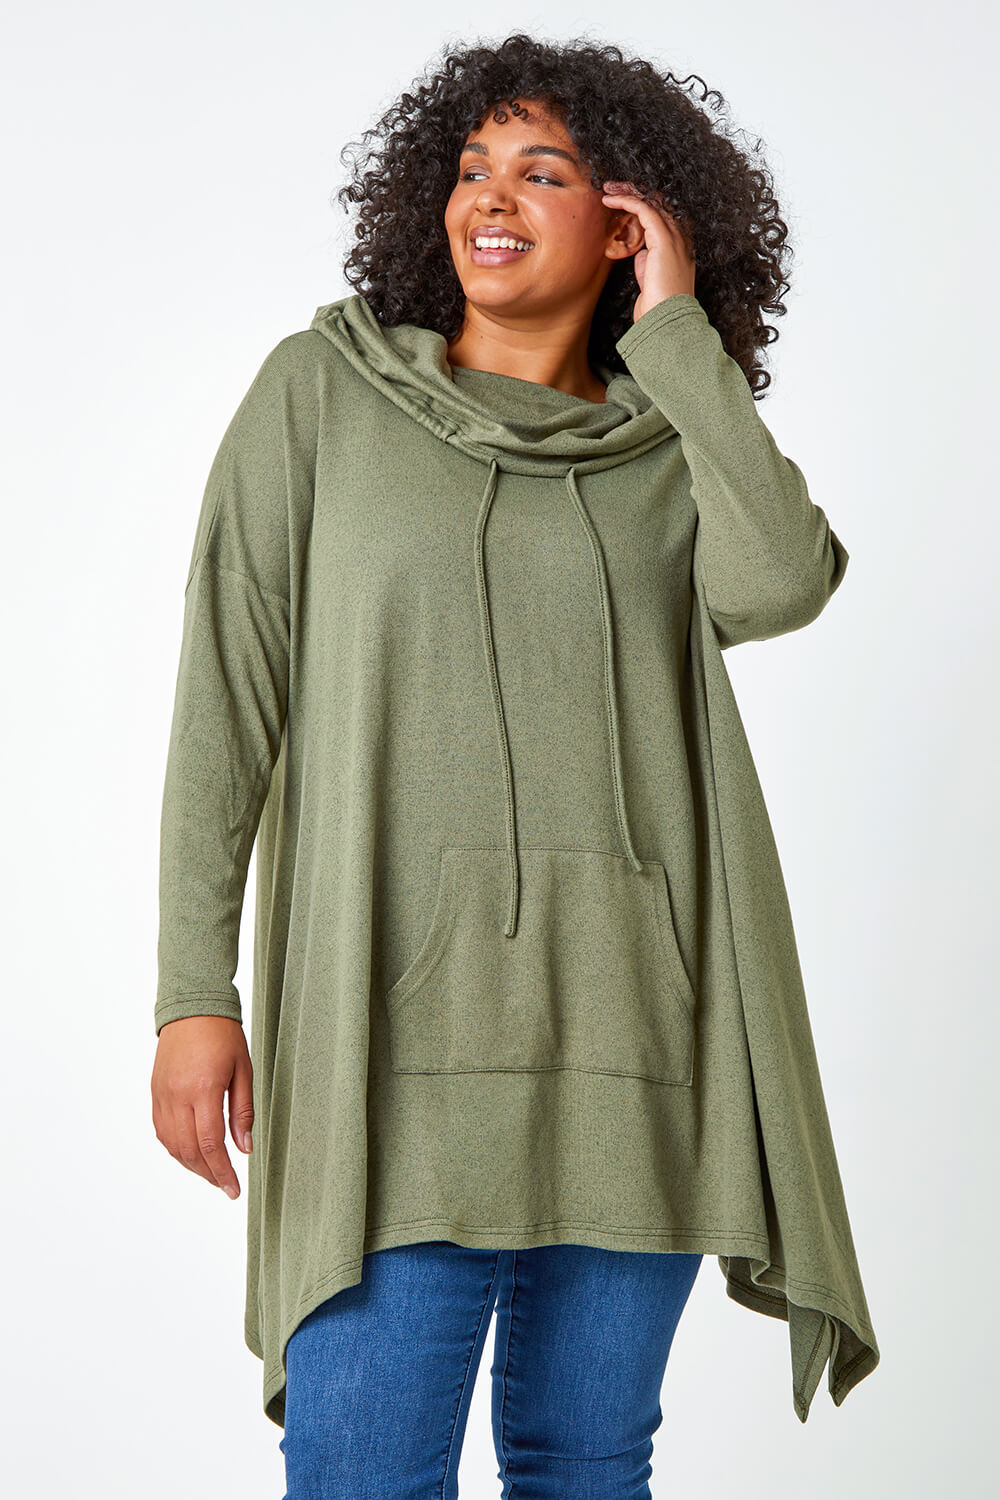 KHAKI Curve Cowl Neck Relaxed Stretch Top, Image 4 of 5